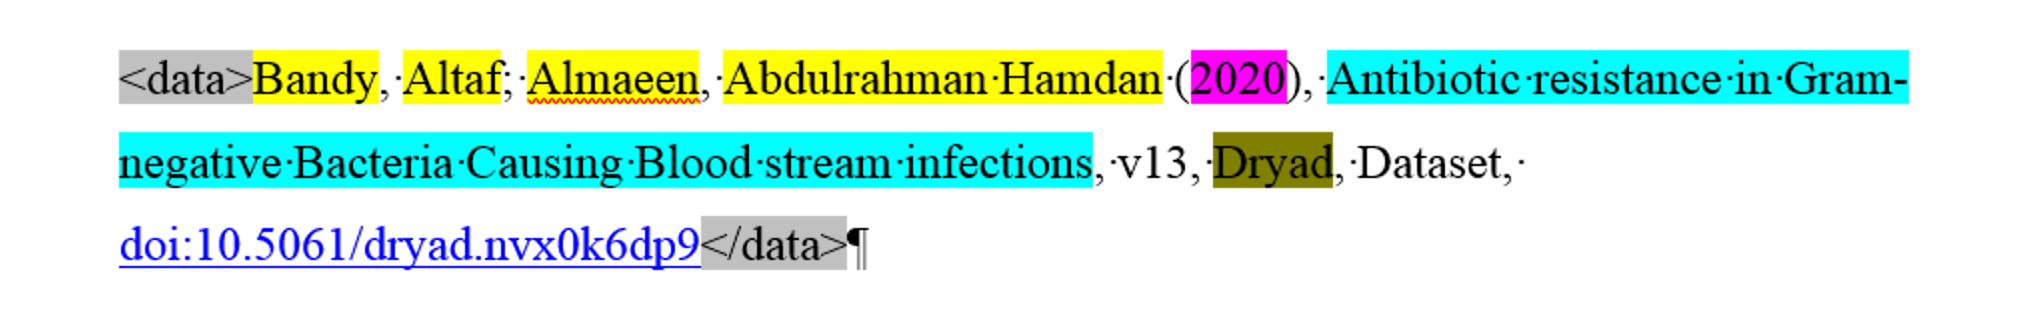 Screenshot of a reference entry processed through eXtyles and identified as a data set: Bandy, Altaf; Almaeen, Abdulrahman Hamdan (2020), Antibiotic resistance in Gram-negative Bacteria Causing Blood stream infections, v13, Dryad, Dataset, doi:10.5061/dryad.nvx0k6dp9. Different elements such as author names and date are highlighted in different colors, and the entry has "data" tags around it.